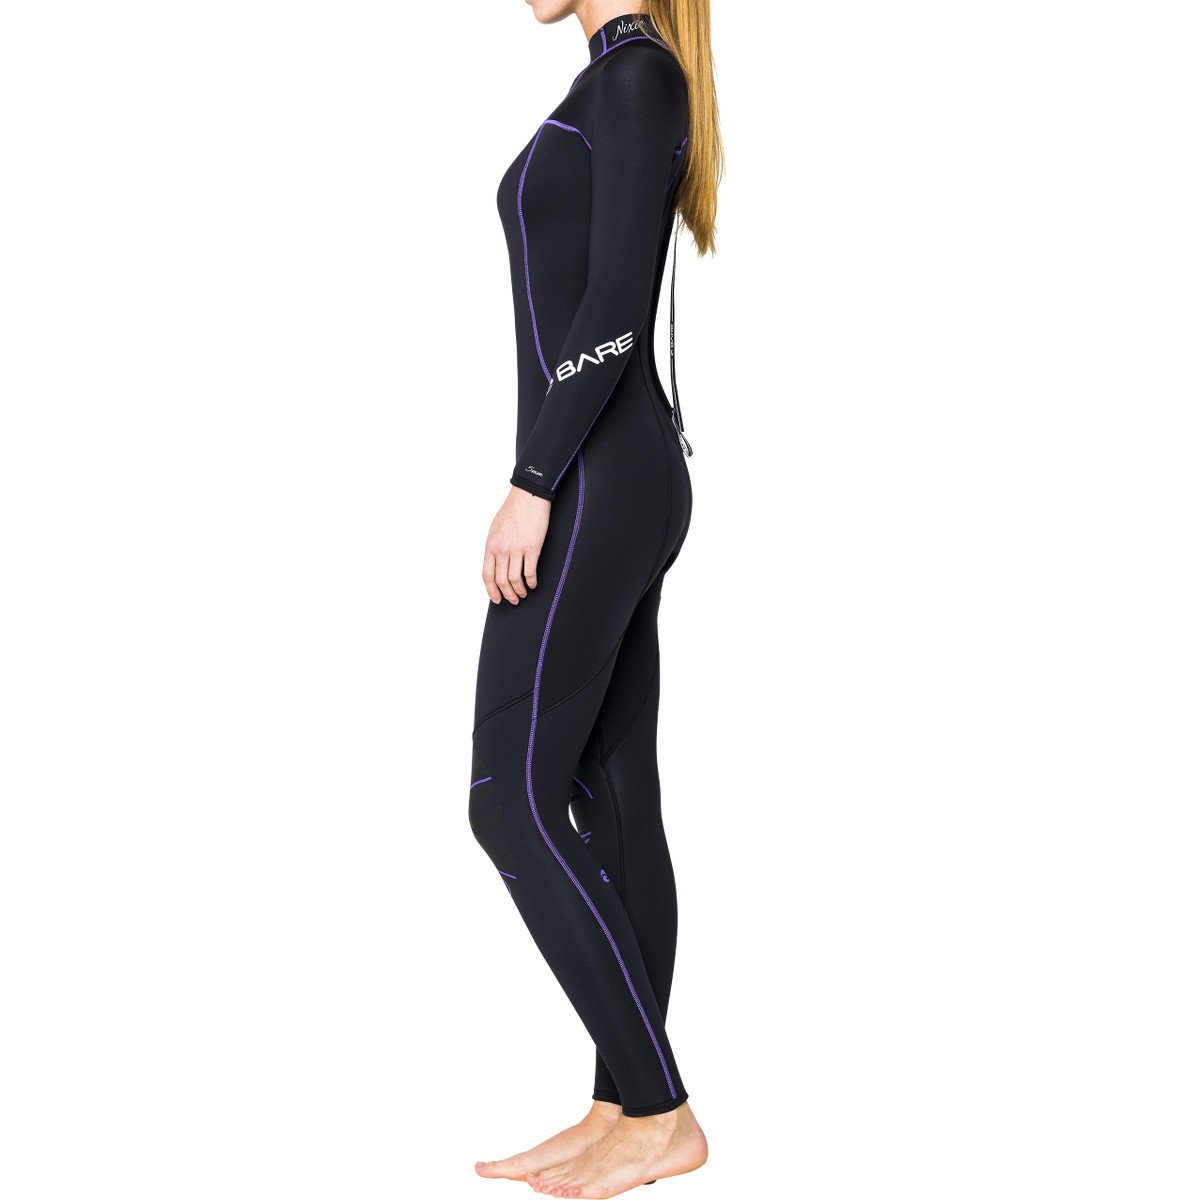 Nixie 5mm Wetsuit:  Womens - Oyster Diving Equipment